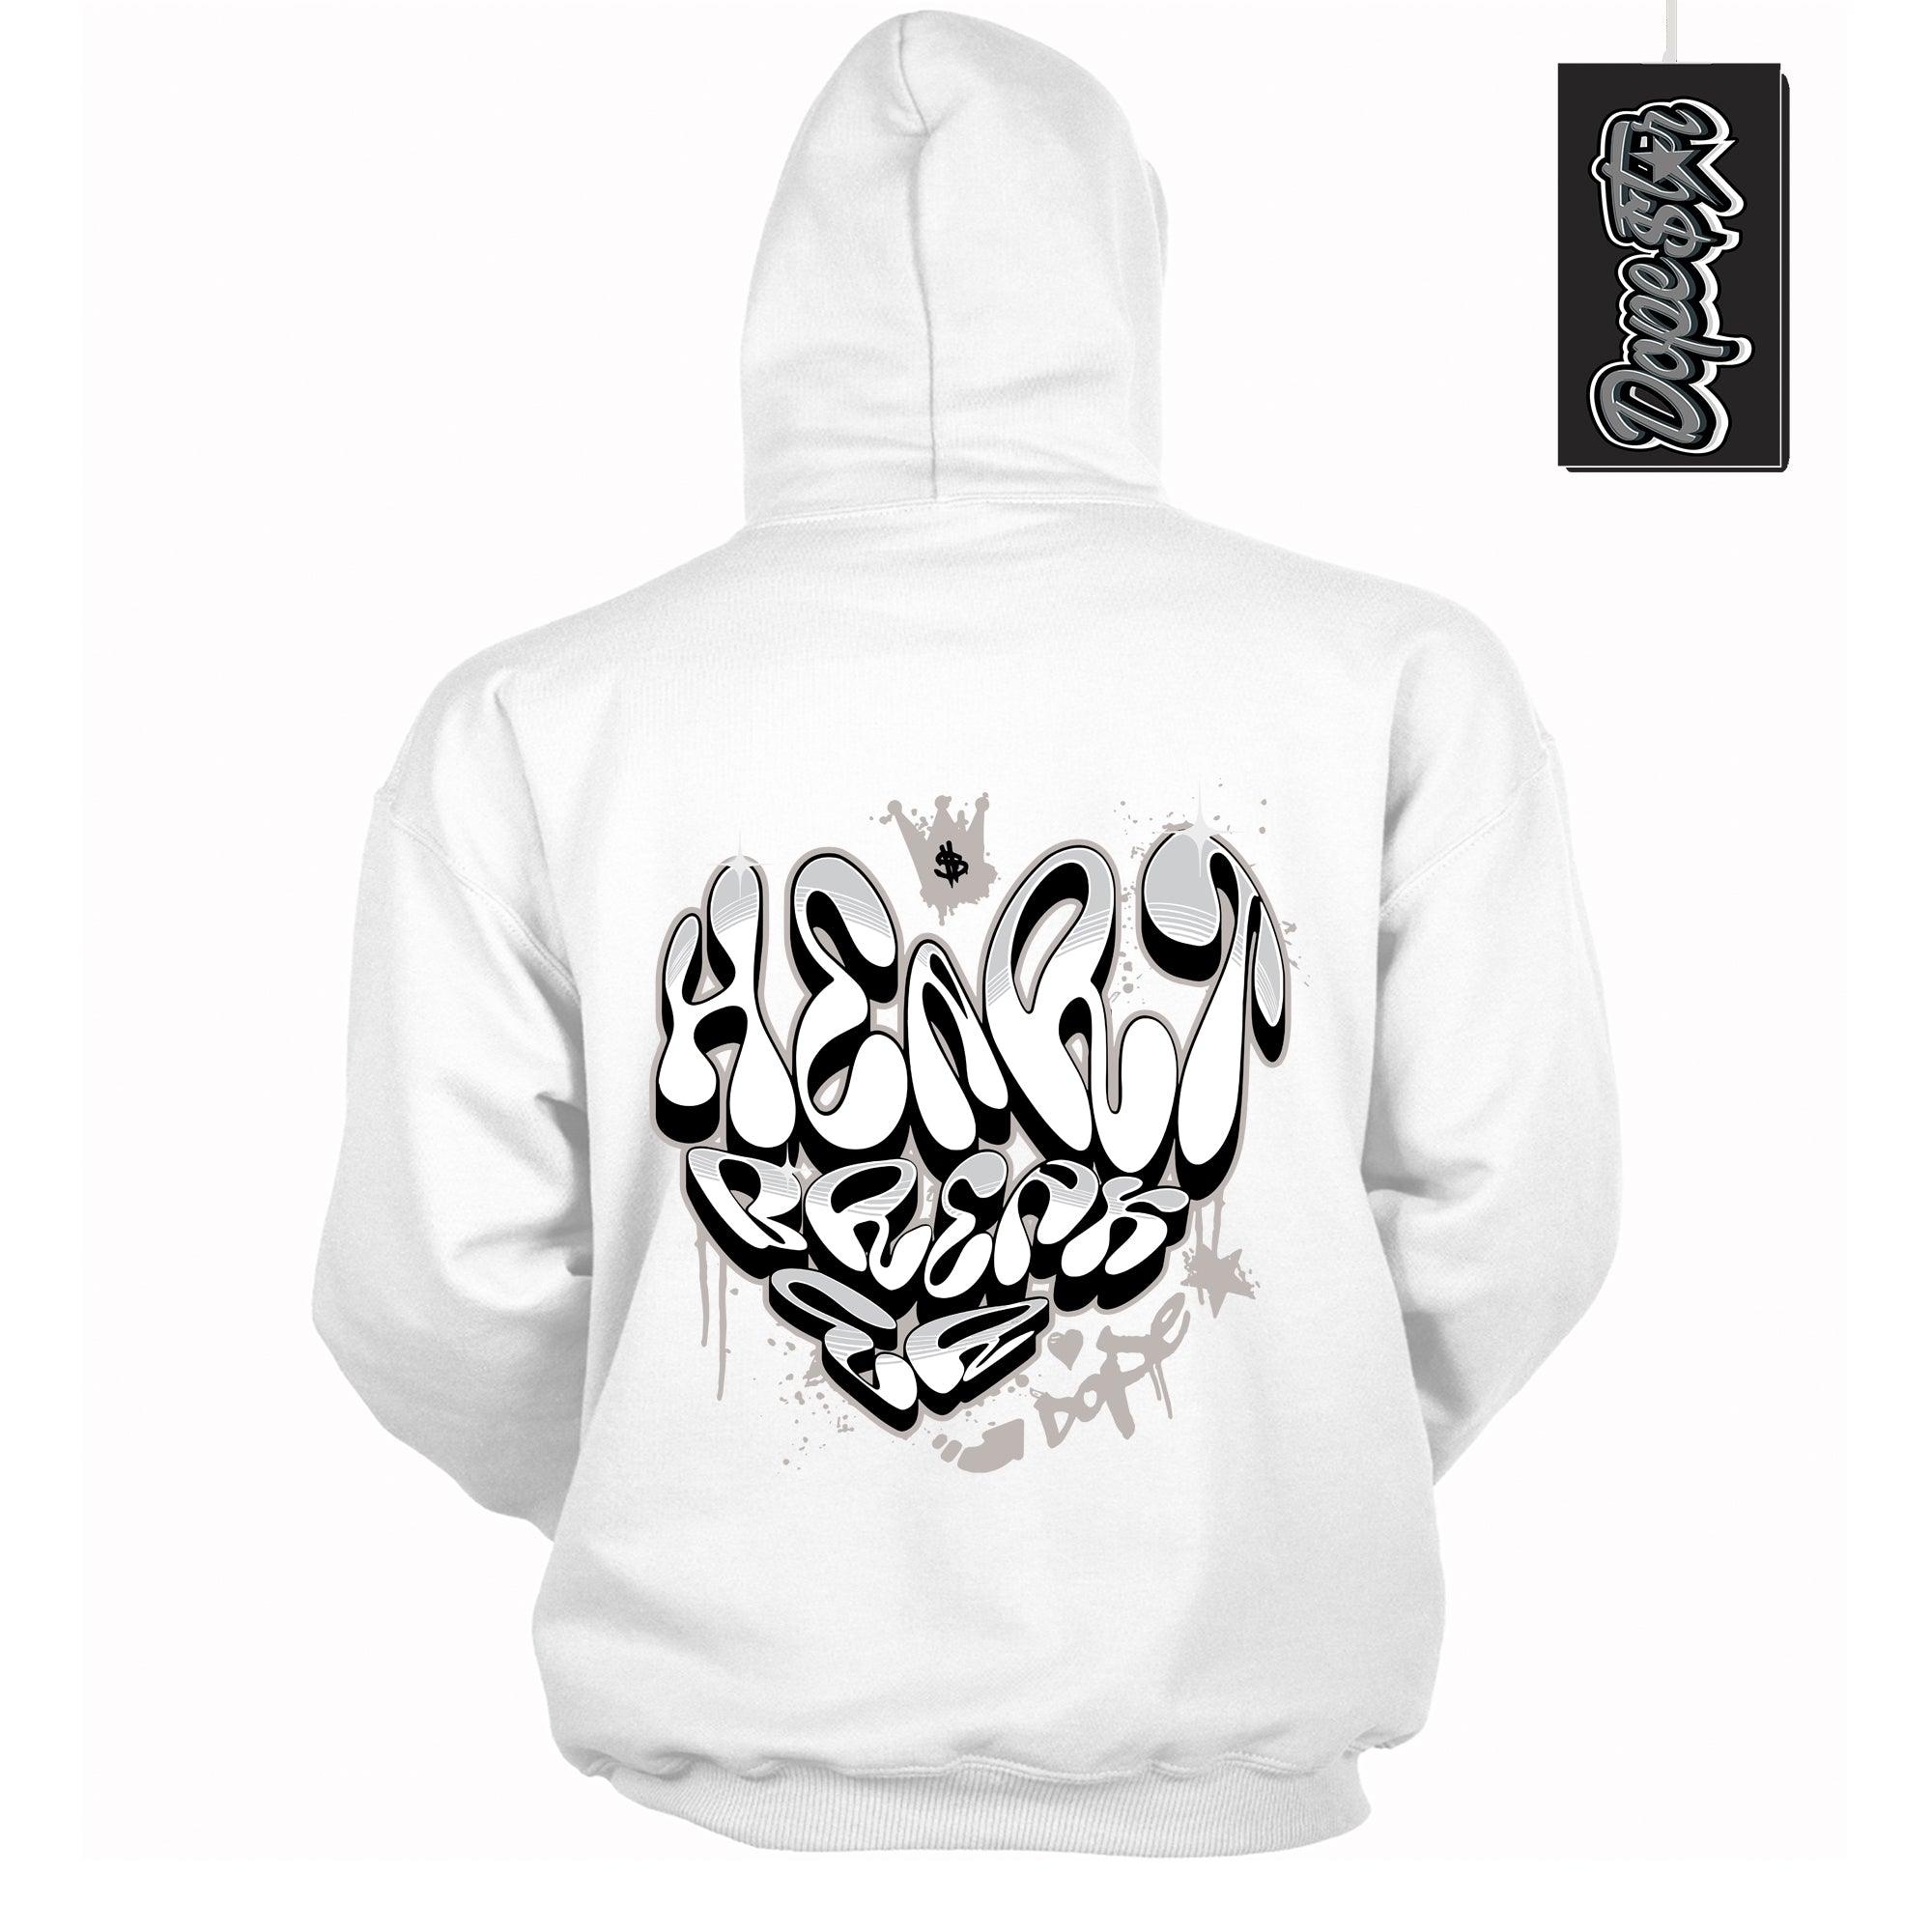 Cool White Hoodie With Heartbreaker Graffiti design That Perfectly Matches AIR JORDAN 4 RETRO MILITARY BLACK Sneakers.